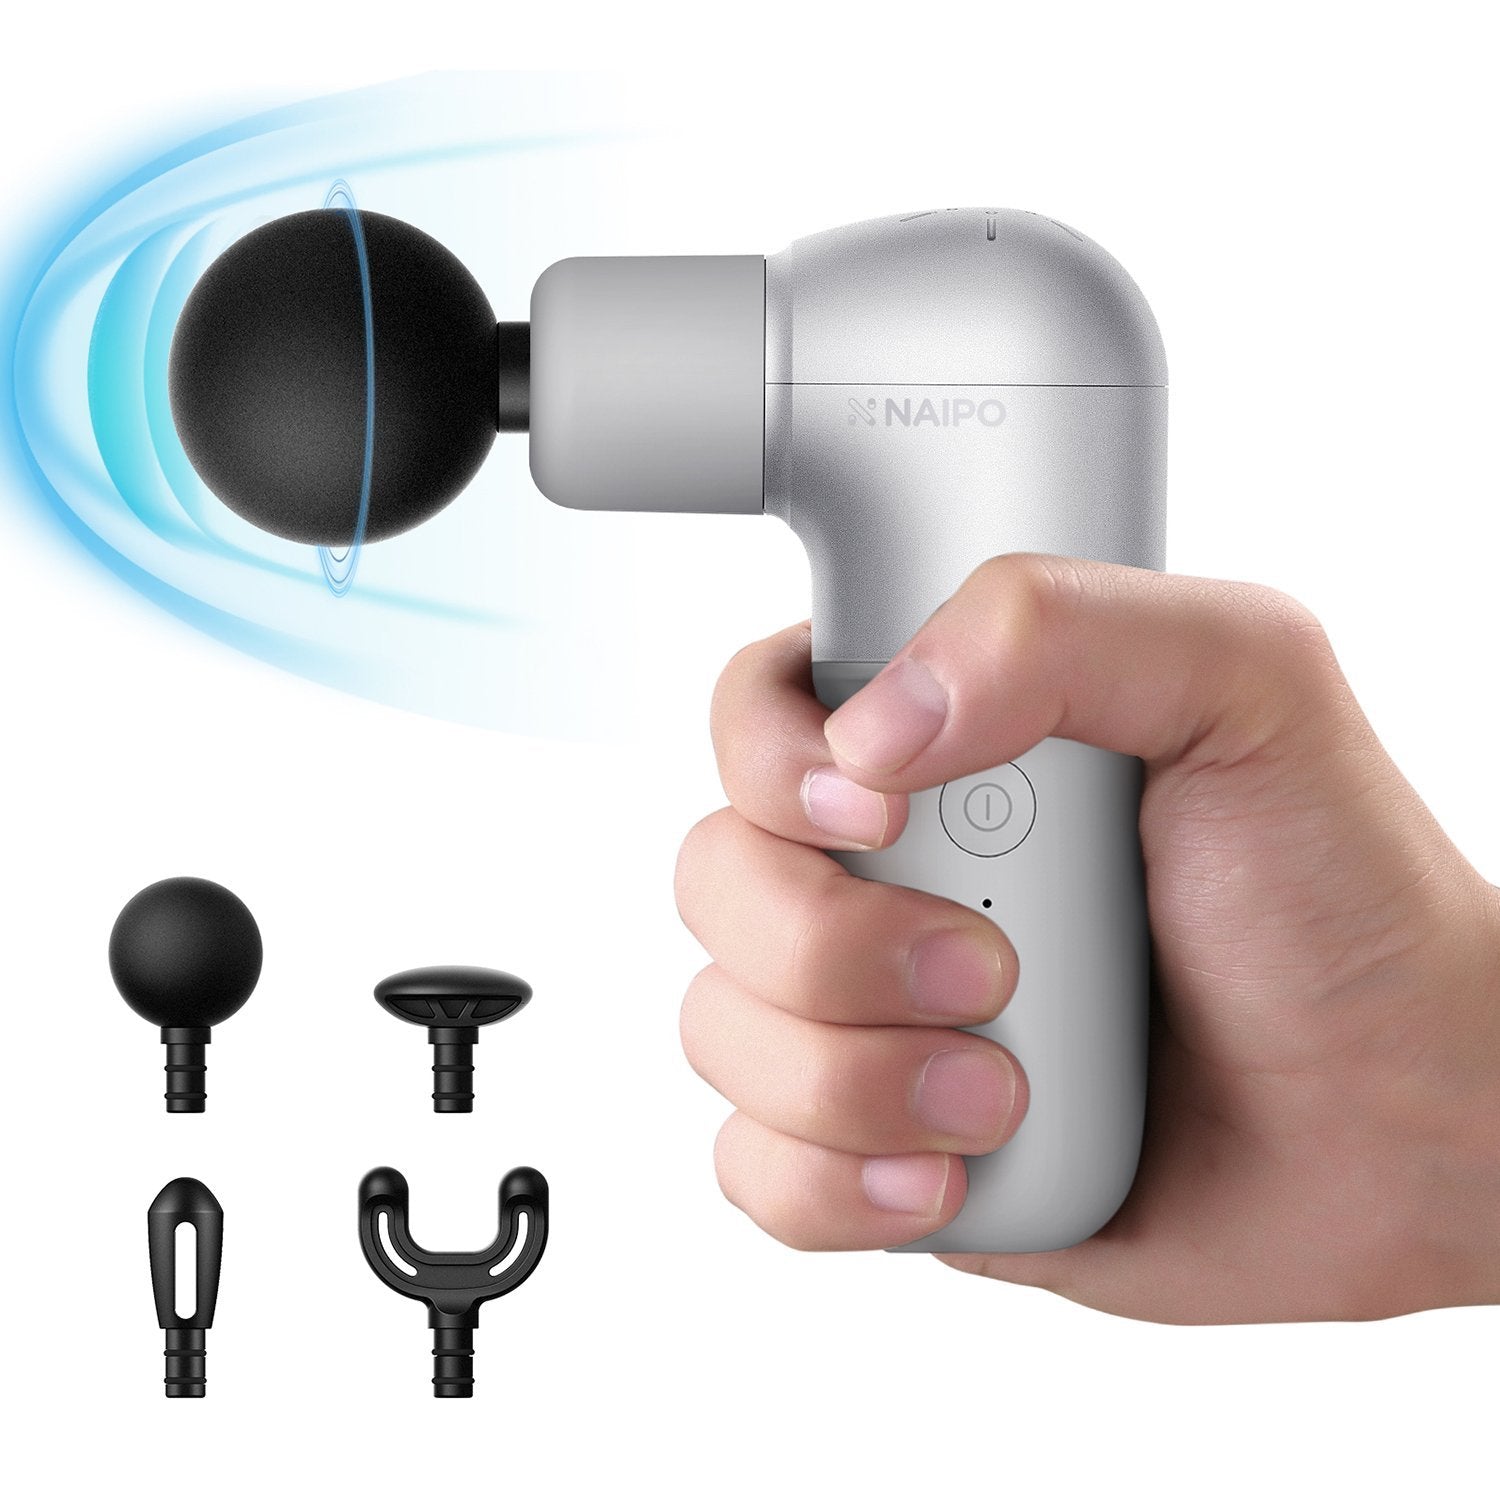 Naipo Massager Review: Why It's A More Affordable Solution